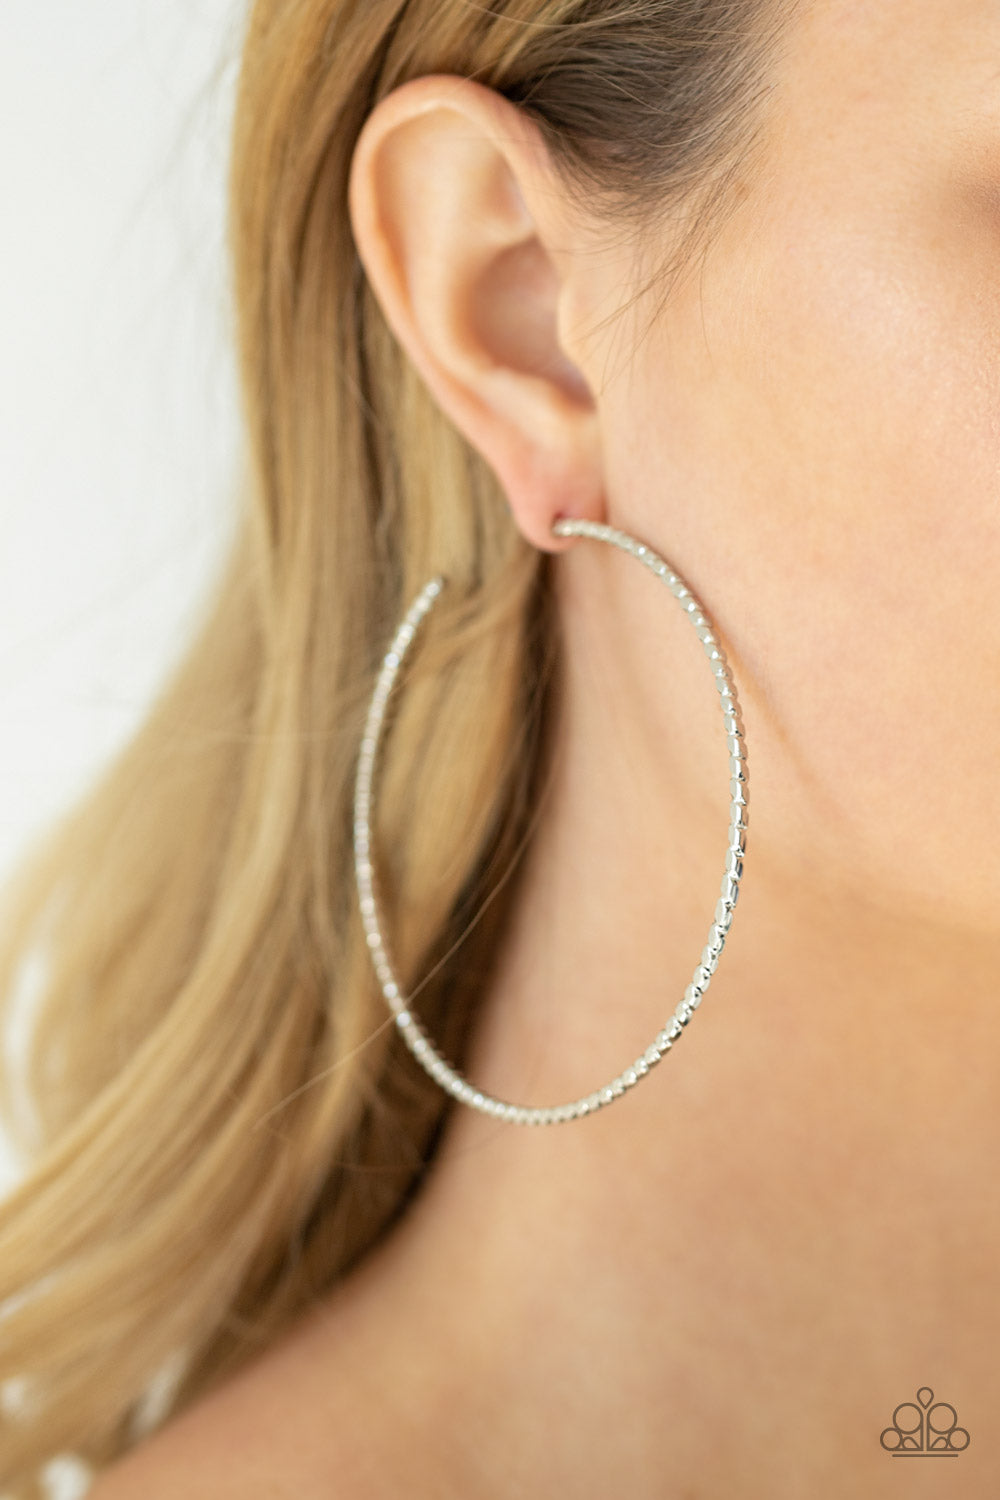 Pump Up The Volume Earring (Black, Silver)